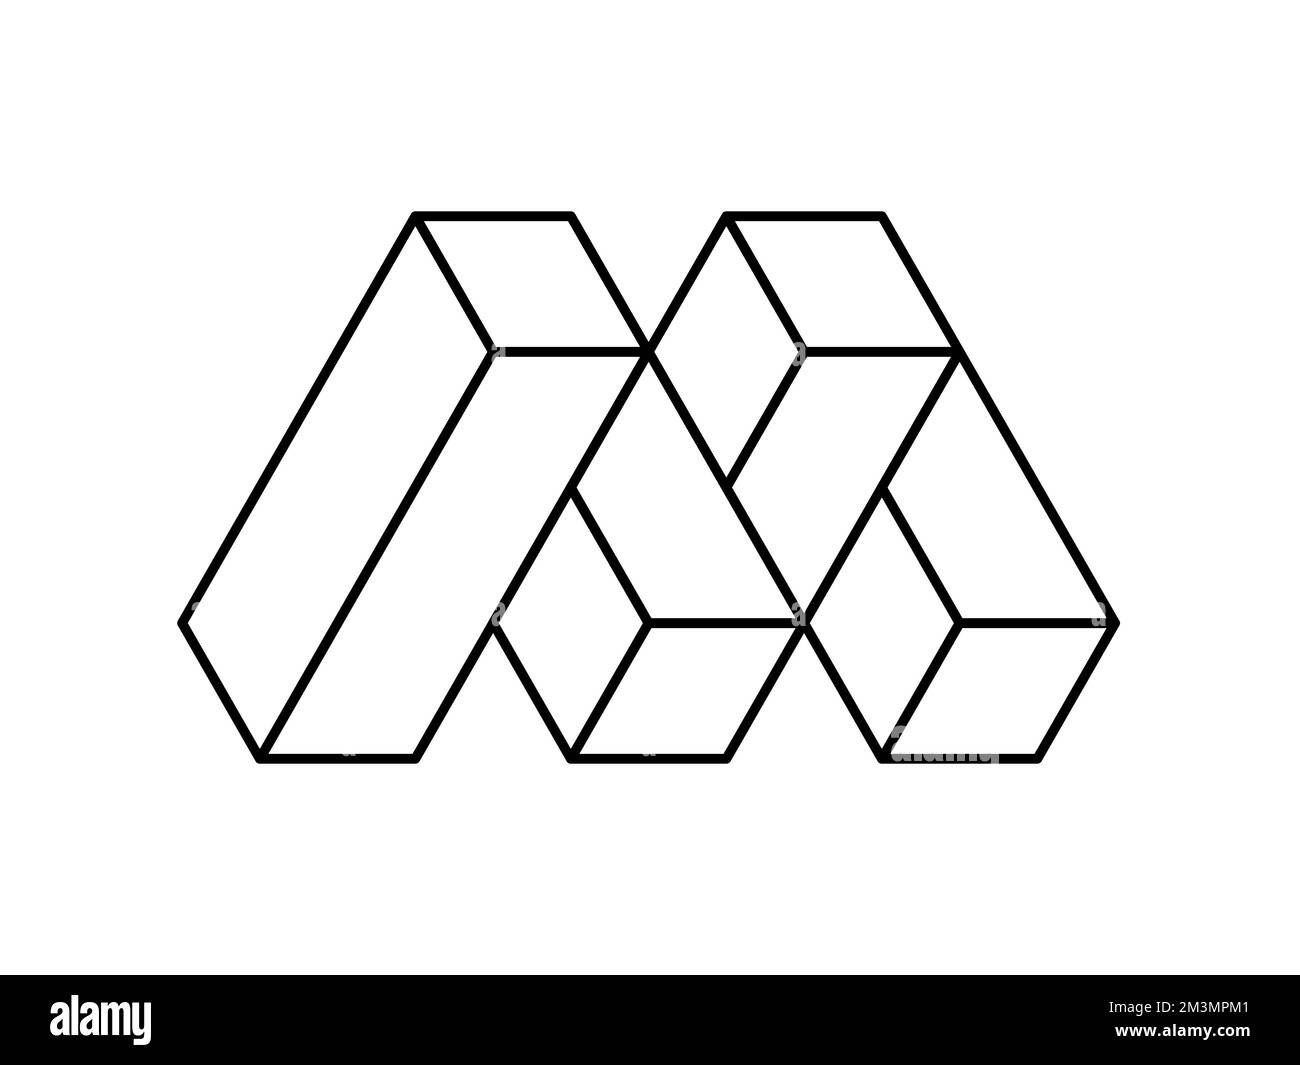 3d letter M logo template. Letter M made of rectangles. Impossible cubes shape. Linear isometric design element. Architecture construction building Stock Vector